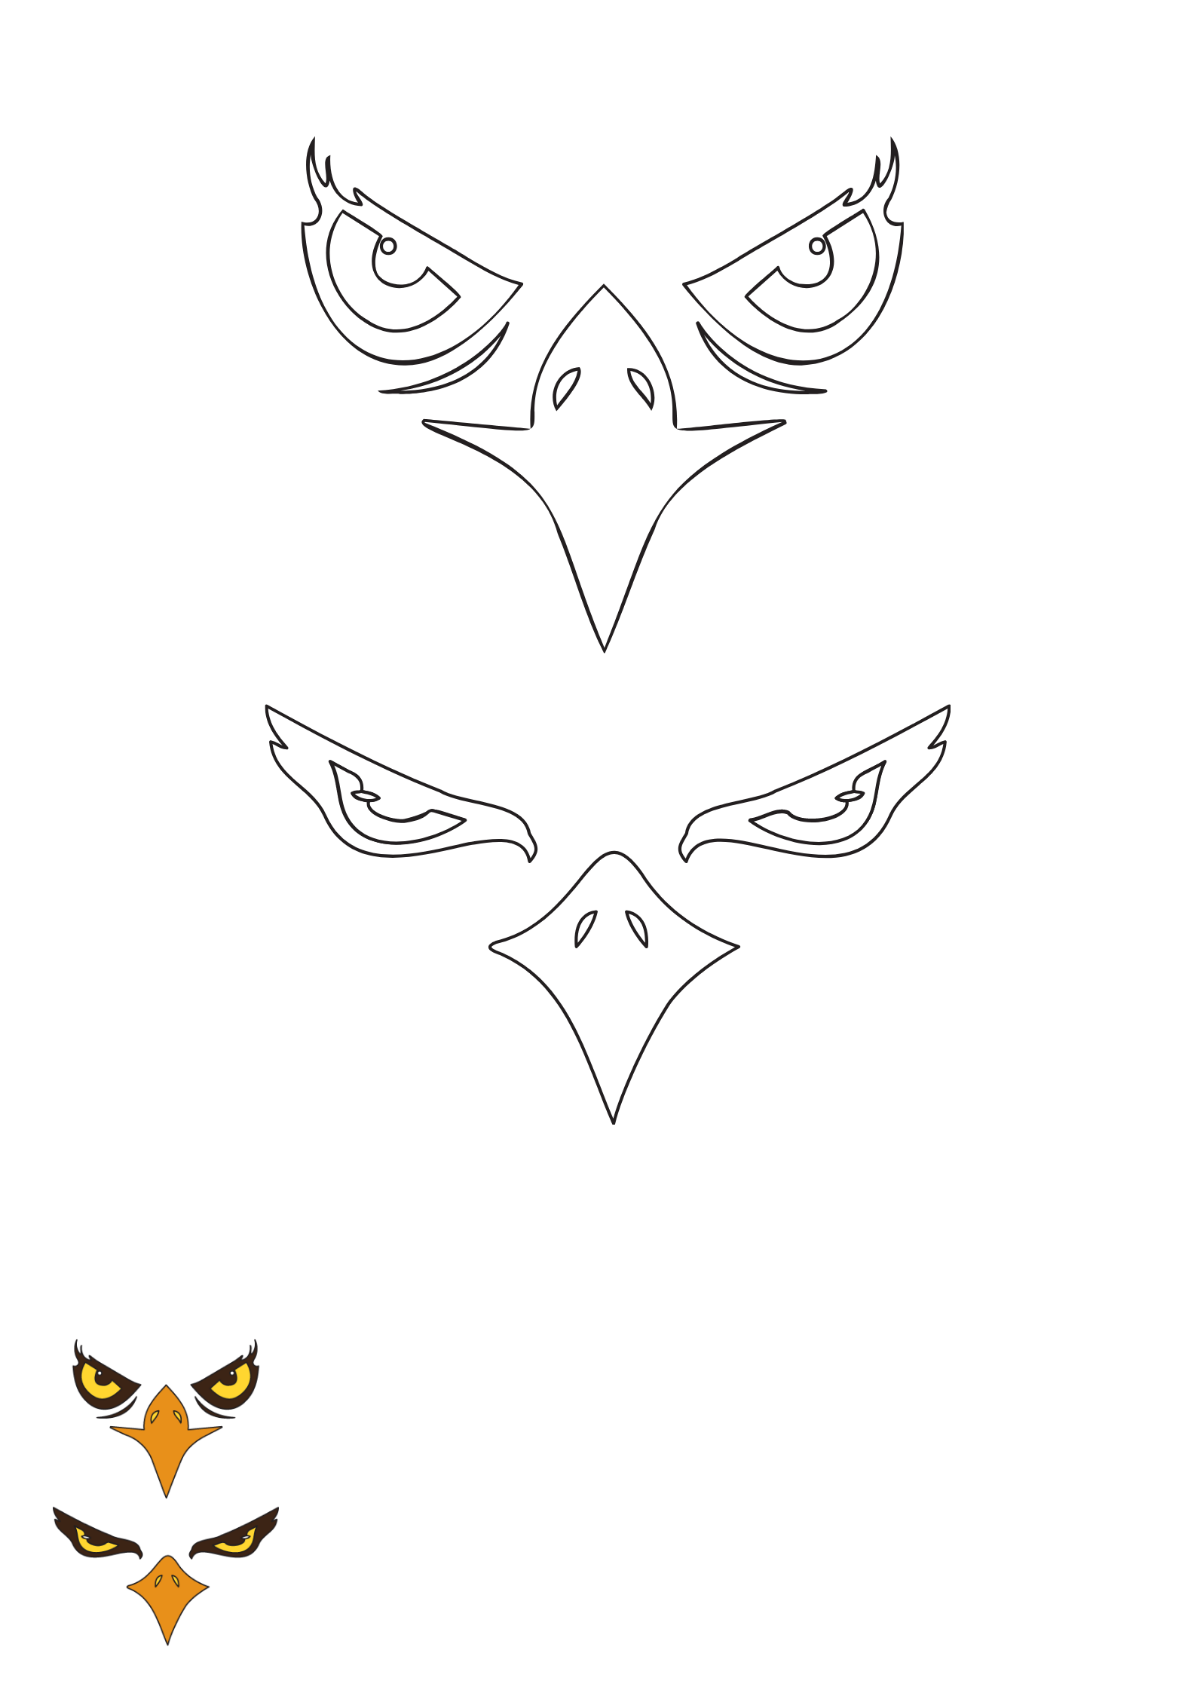 Eagle Eye coloring page Template